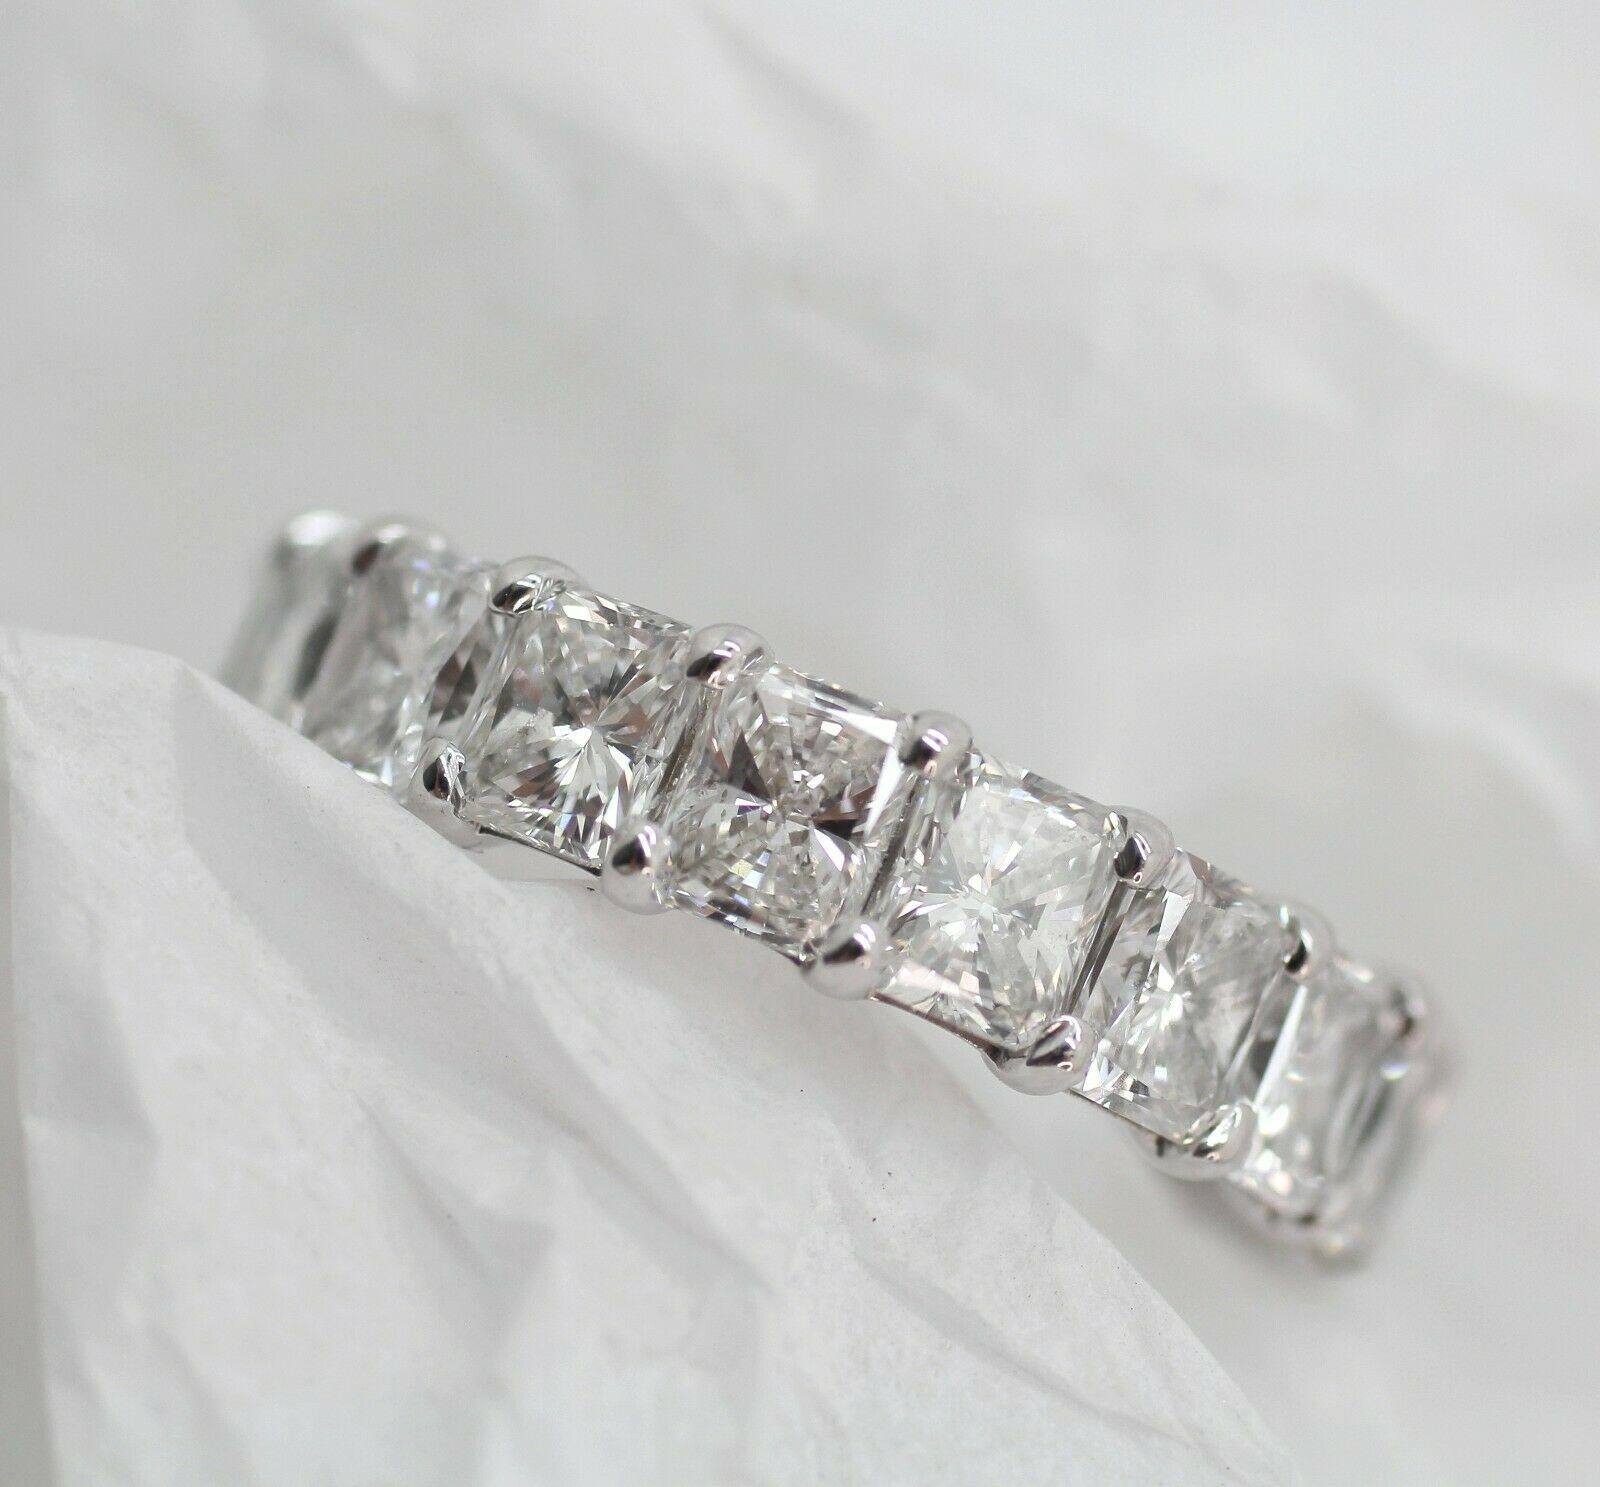 Specifications:
    main stone:RADIANT CUT DIAMOND
    DIAMONDS:18 PCS
    carat total weight:5.67 CARAT TOTAL WEIGHT
    color:G
    clarity:SI1
    brand:NONE
    metal:14K WHITE GOLD
    type:ETERNITY ring
    weight: 3.91 GrS
    size:6.25 US

